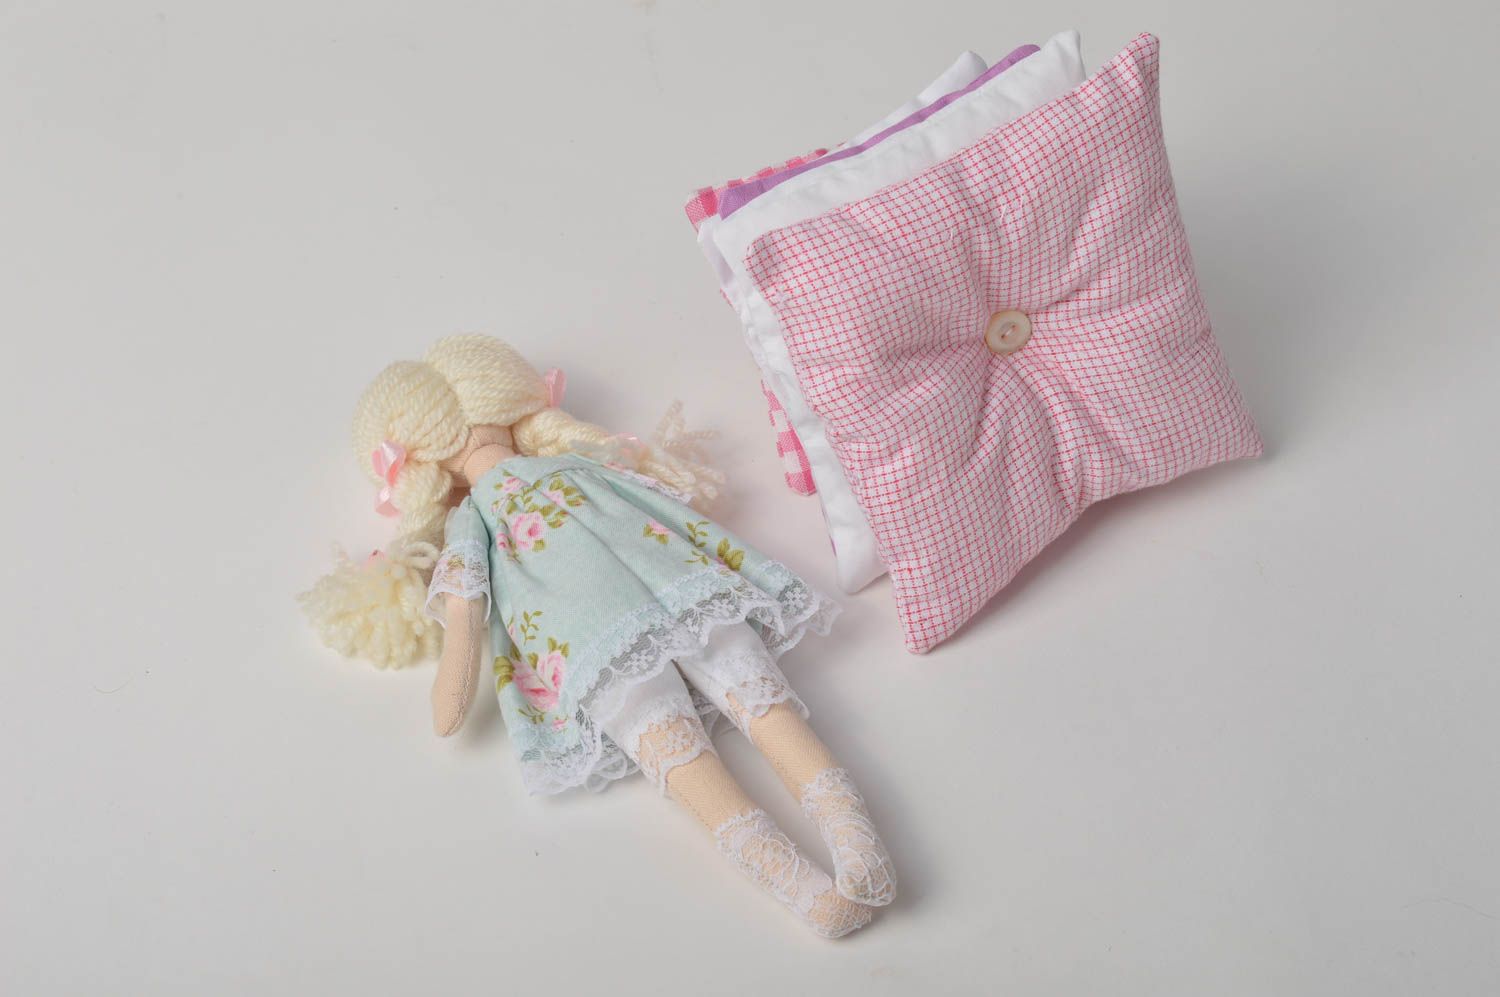 Handmade doll designer doll unusual gift for baby doll with pillow decor ideas photo 4